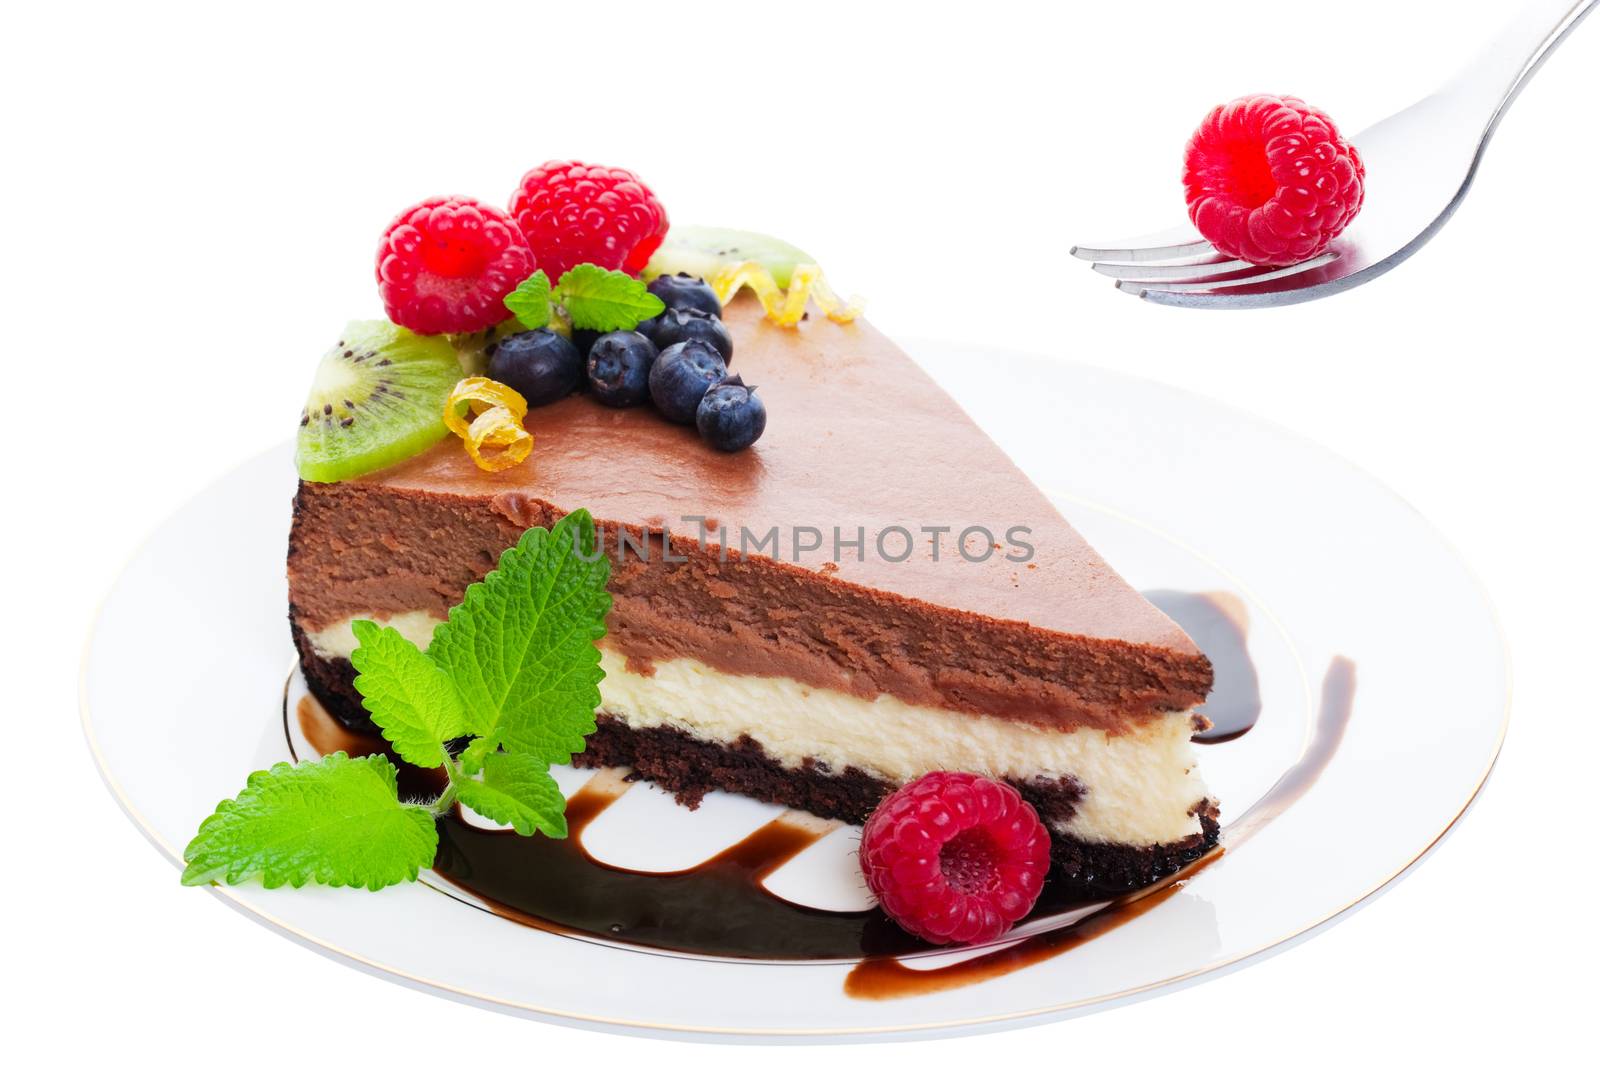 New York Style, triple layer, chocolate cheesecake served on a chocolate drizzled plate and garnished with raspberries, blueberries, kiwi, and fresh sprigs of lemon balm.  Delicate citrus curls add a touch of elegance.  Shot on white background.